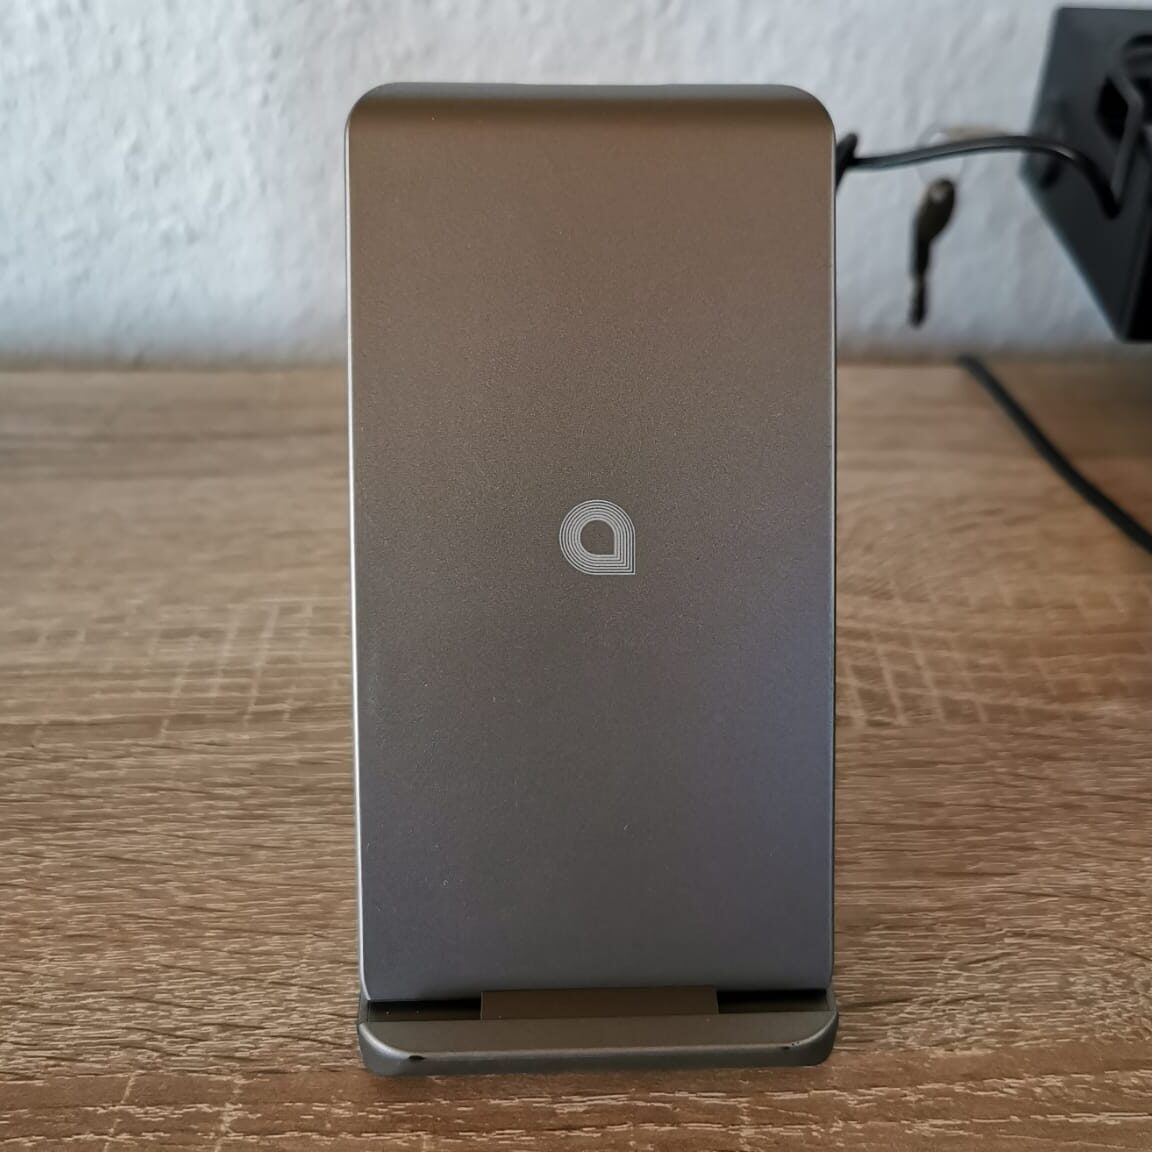 You are currently viewing Aplic QI Charger Induktive Schnelladestation – Test